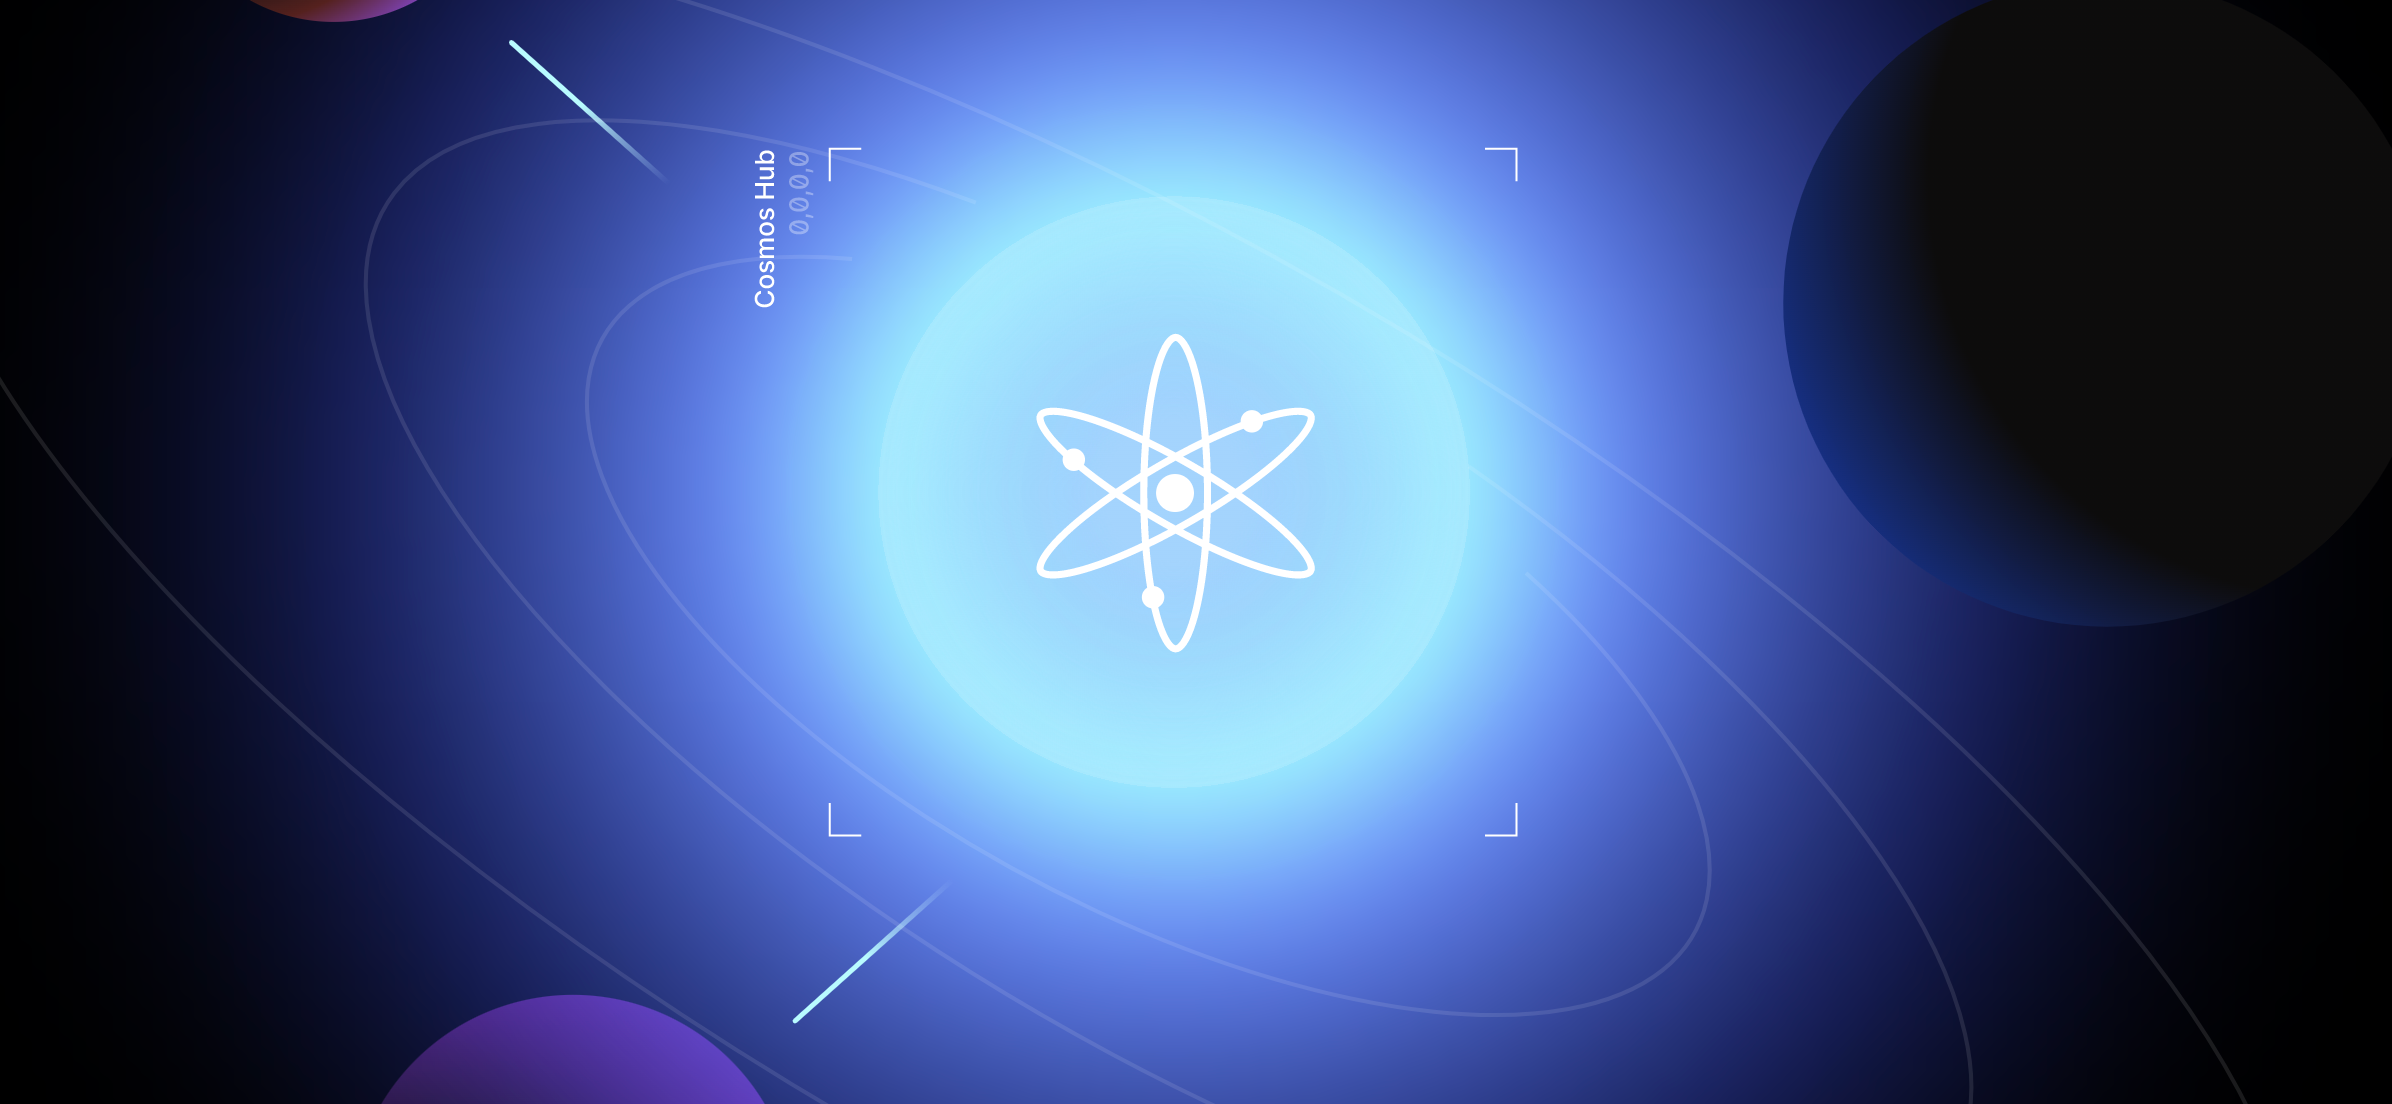 The Cosmos (ATOM) hub represented on the official website.